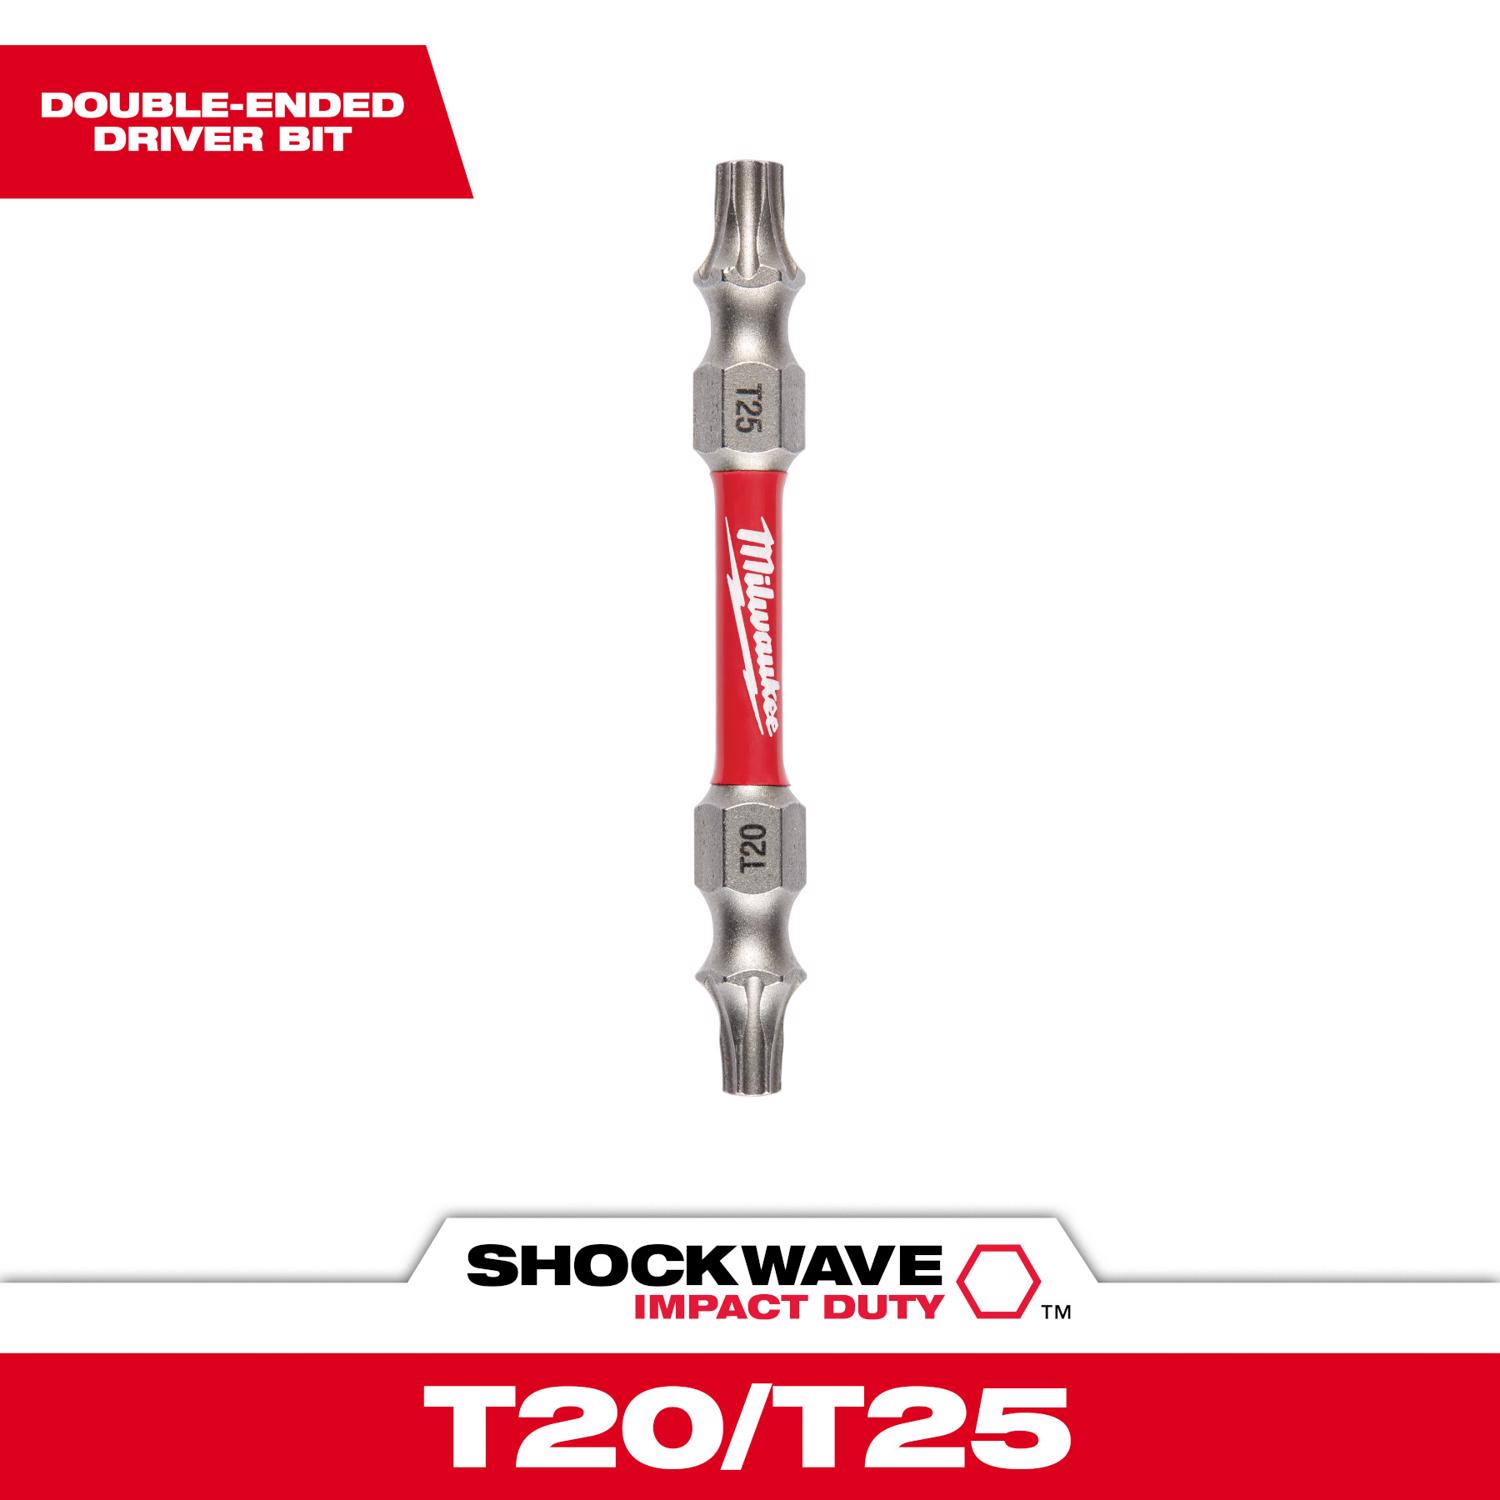 Photos - Drill Bit Milwaukee Shockwave Torx T20/T25 X 2-3/8 in. L Impact Double-Ended Power B 